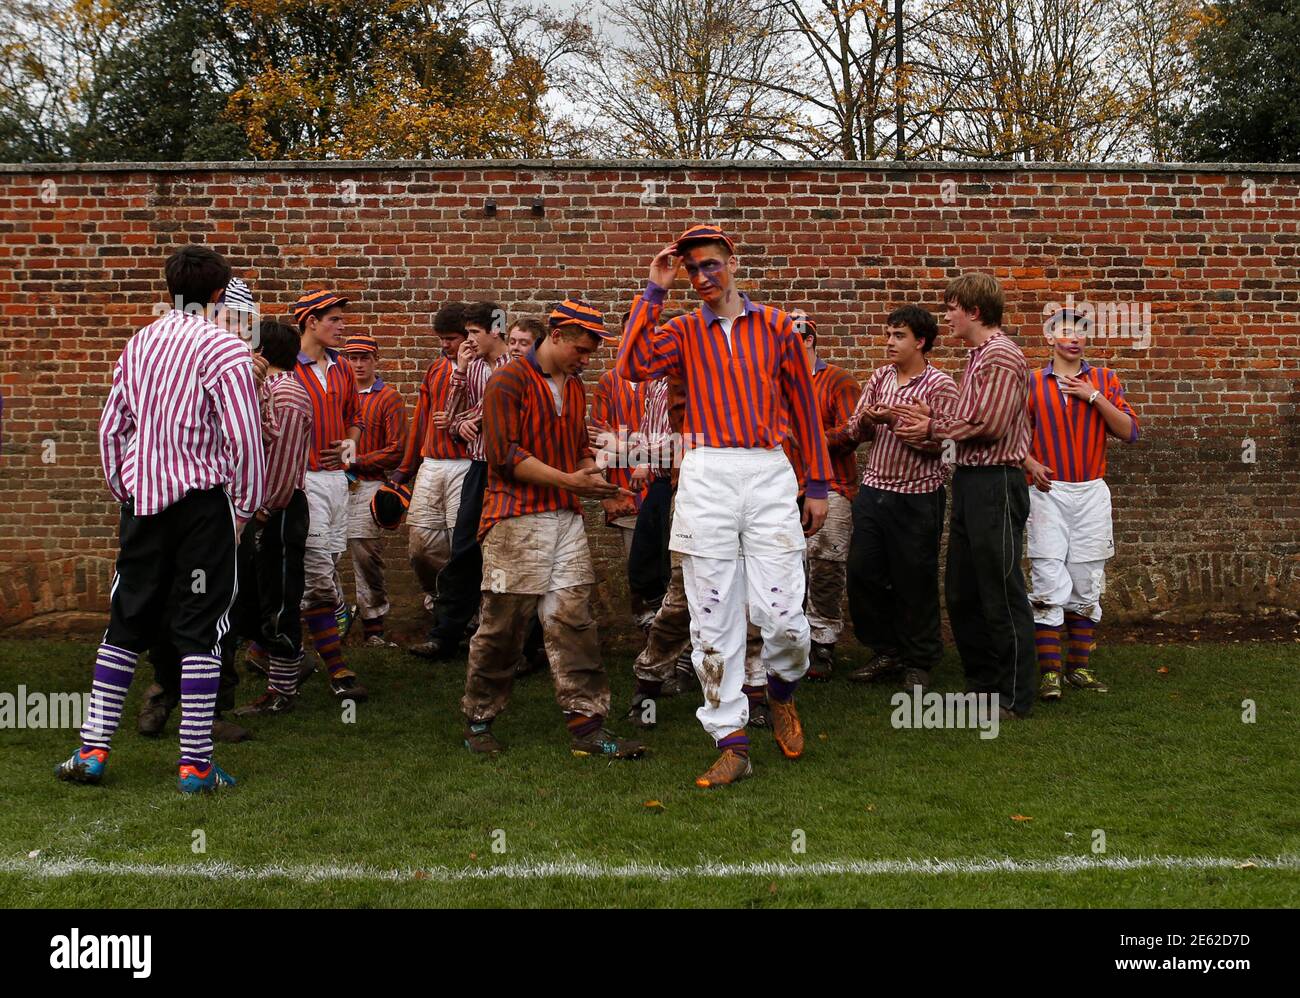 The Collegers and the Oppidans teams compete during the Eton Wall Game at  Eton college in Eton November 17, 2012. Originating in 1766, the game is  played on a narrow strip 110